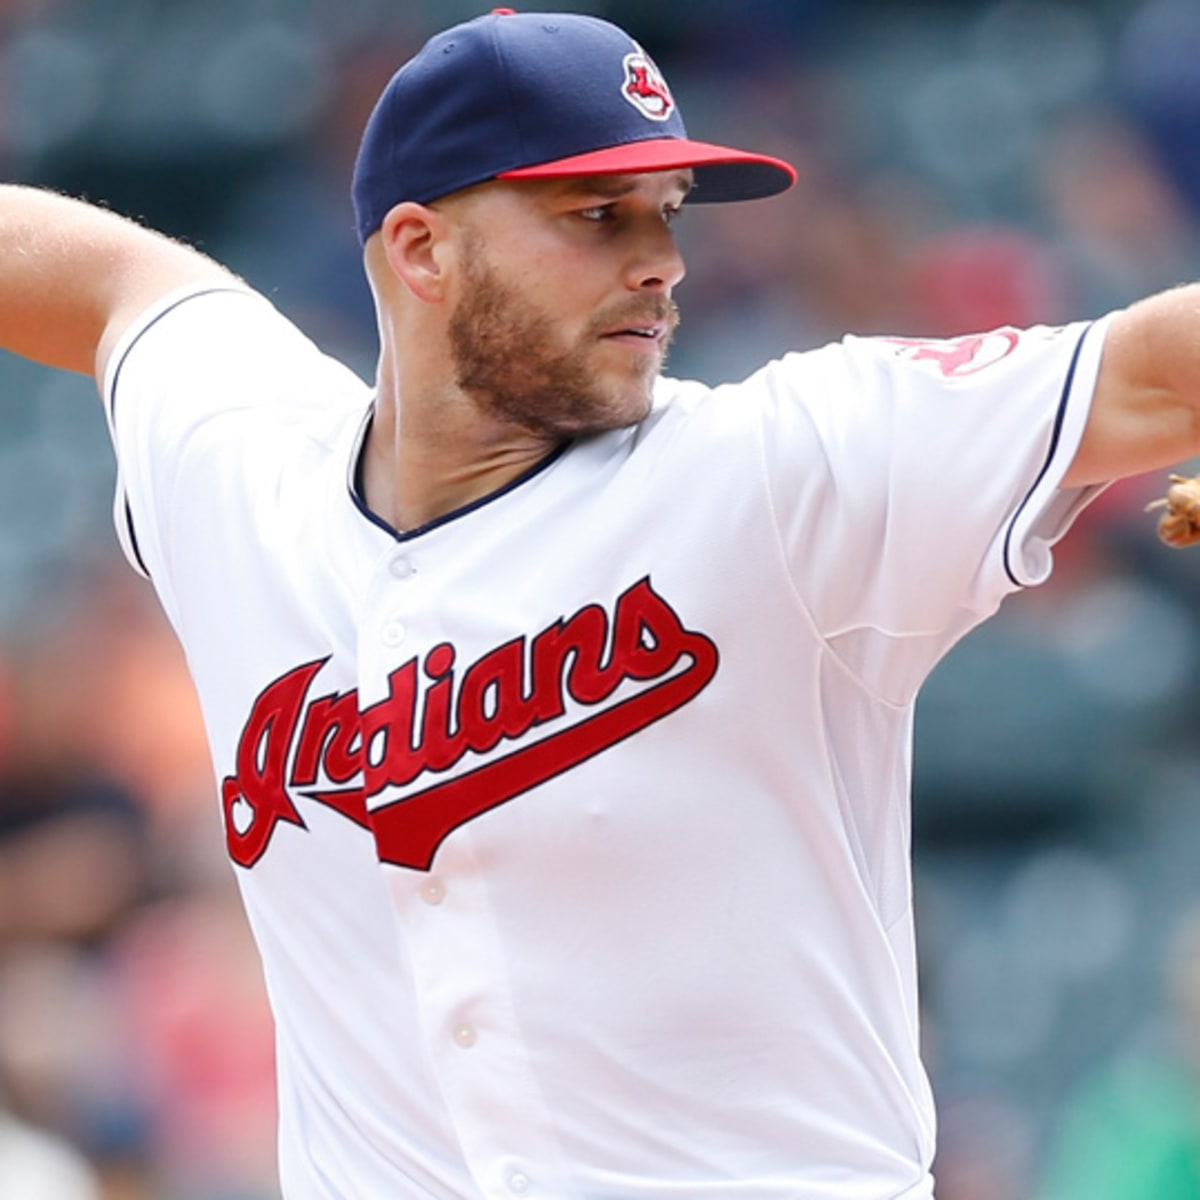 The Cardinals acquire Justin Masterson from the Indians